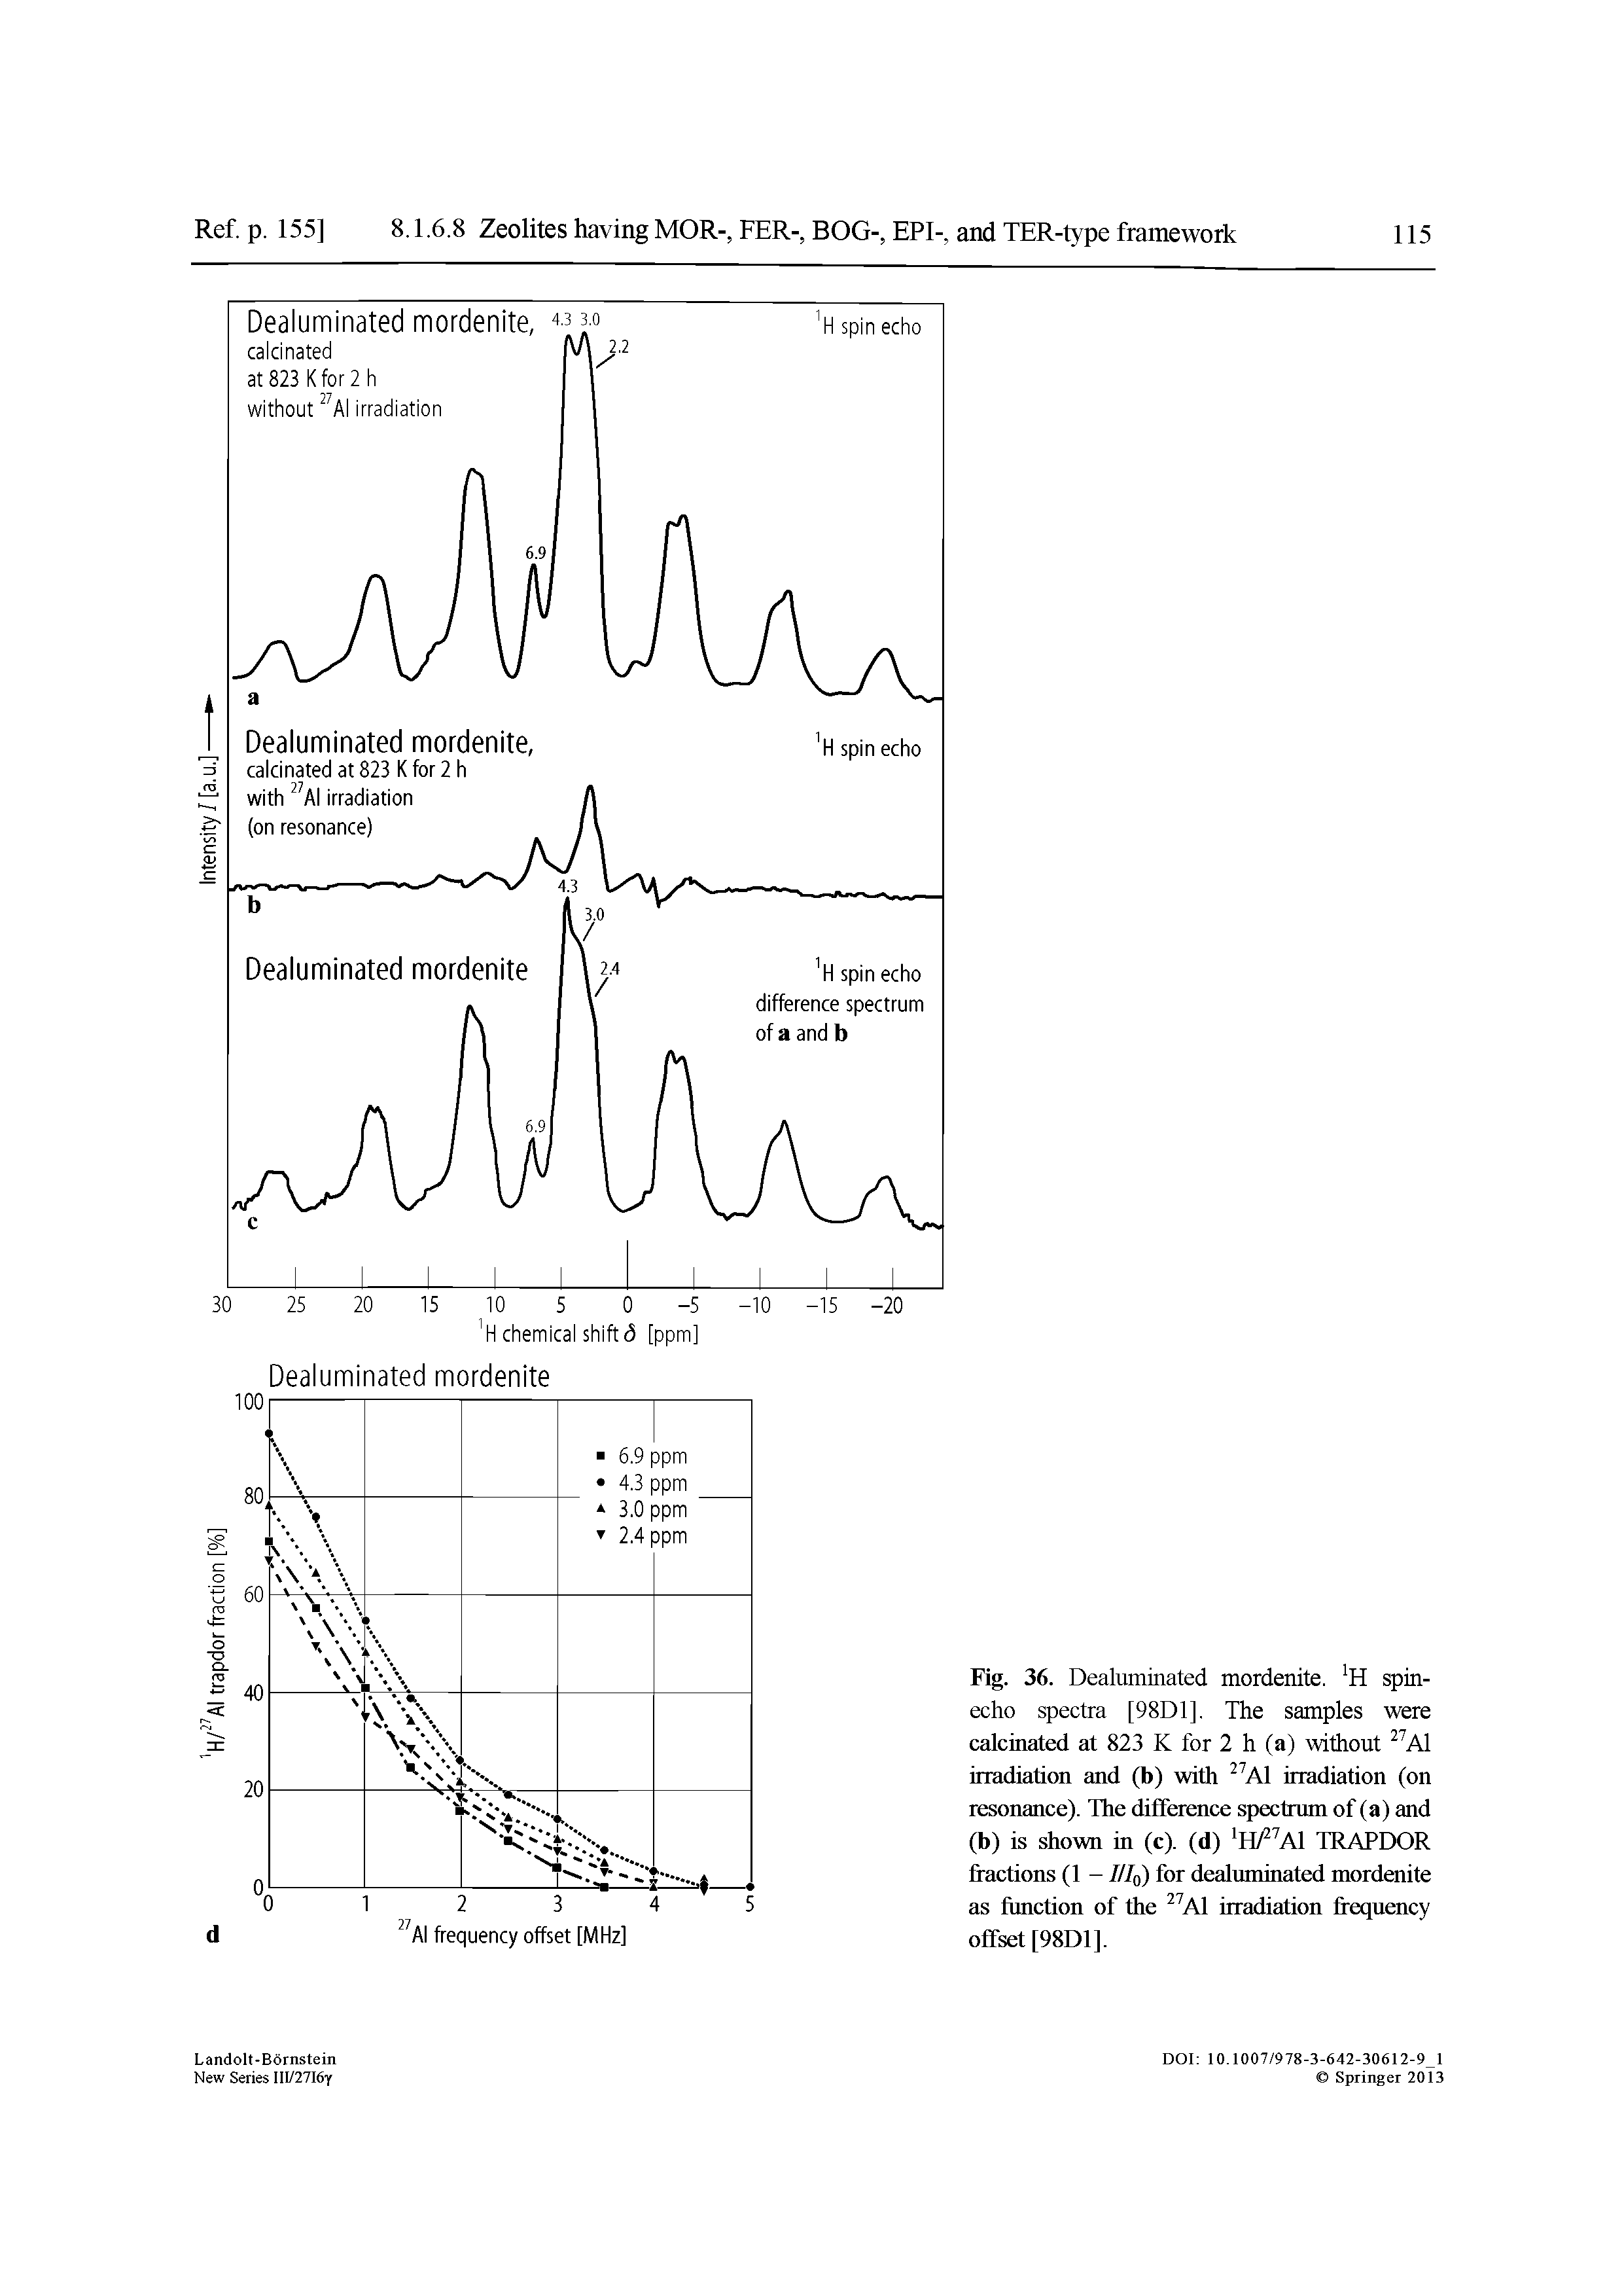 Fig. 36. Dealuminated mordenite. H spin-echo spectra [98D1]. The samples were calcinated at 823 K for 2 h (a) without Al irradiation and (b) with Al irradiation (on resonance). The difference spectrum of (a) and (b) is shown in (c). (d) H/ Al TRAPDOR fractions (1 - ///q) for dealuminated mordenite as function of the Al irradiation frequency offset [98D1].